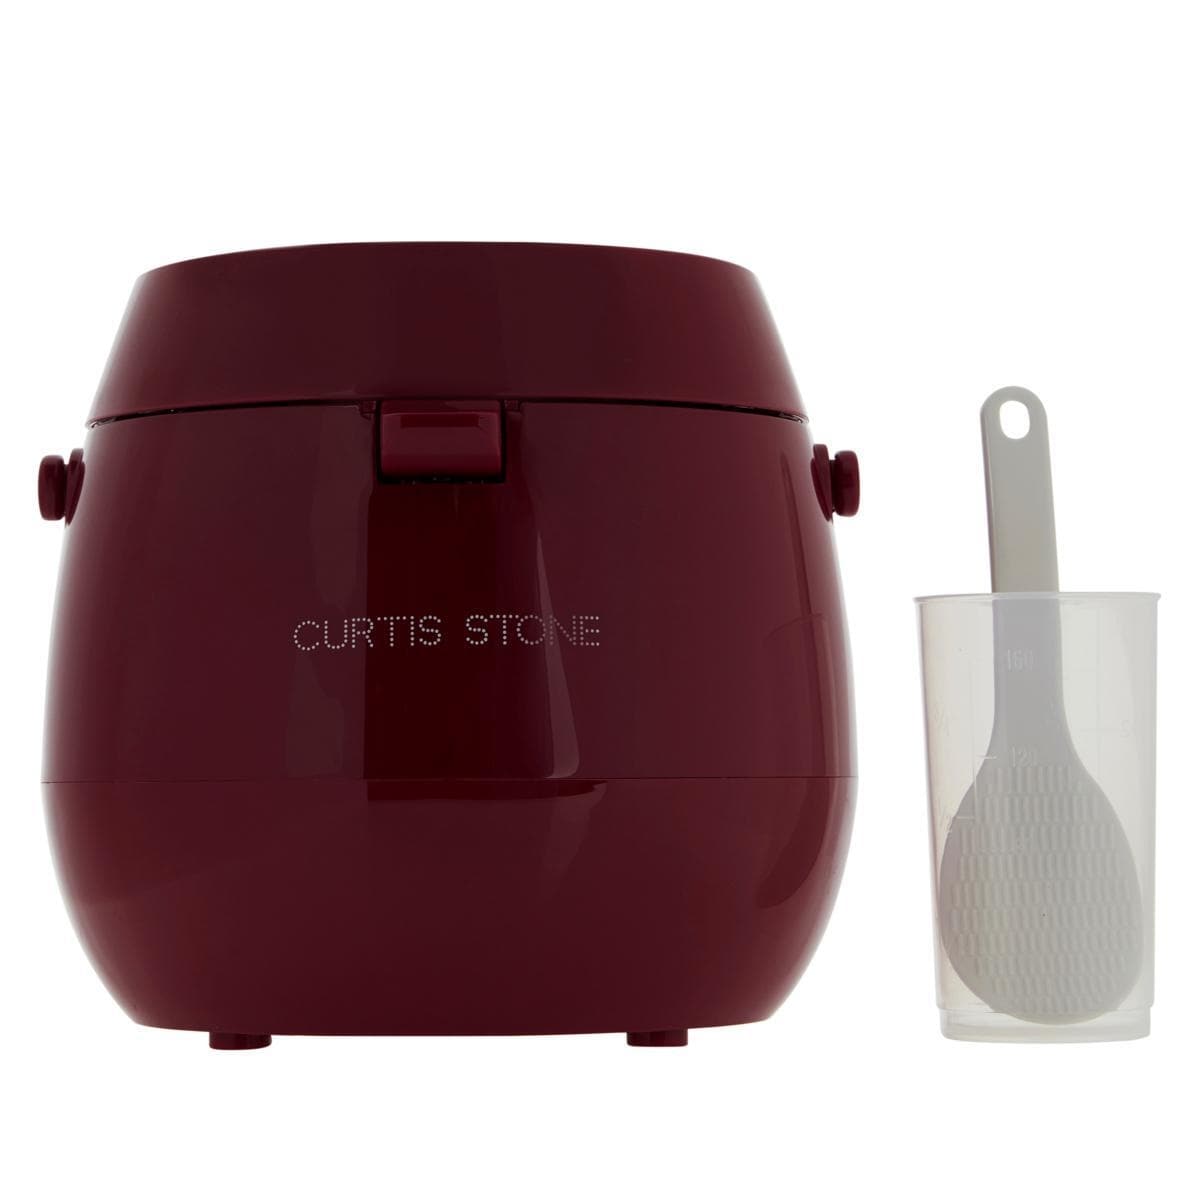 https://ak1.ostkcdn.com/images/products/is/images/direct/7a568aab47d6f08bcf525f513465df9b8765f7e5/Curtis-Stone-Dura-Pan-Nonstick-Mini-Multi-Cooker-Refurbished.jpg